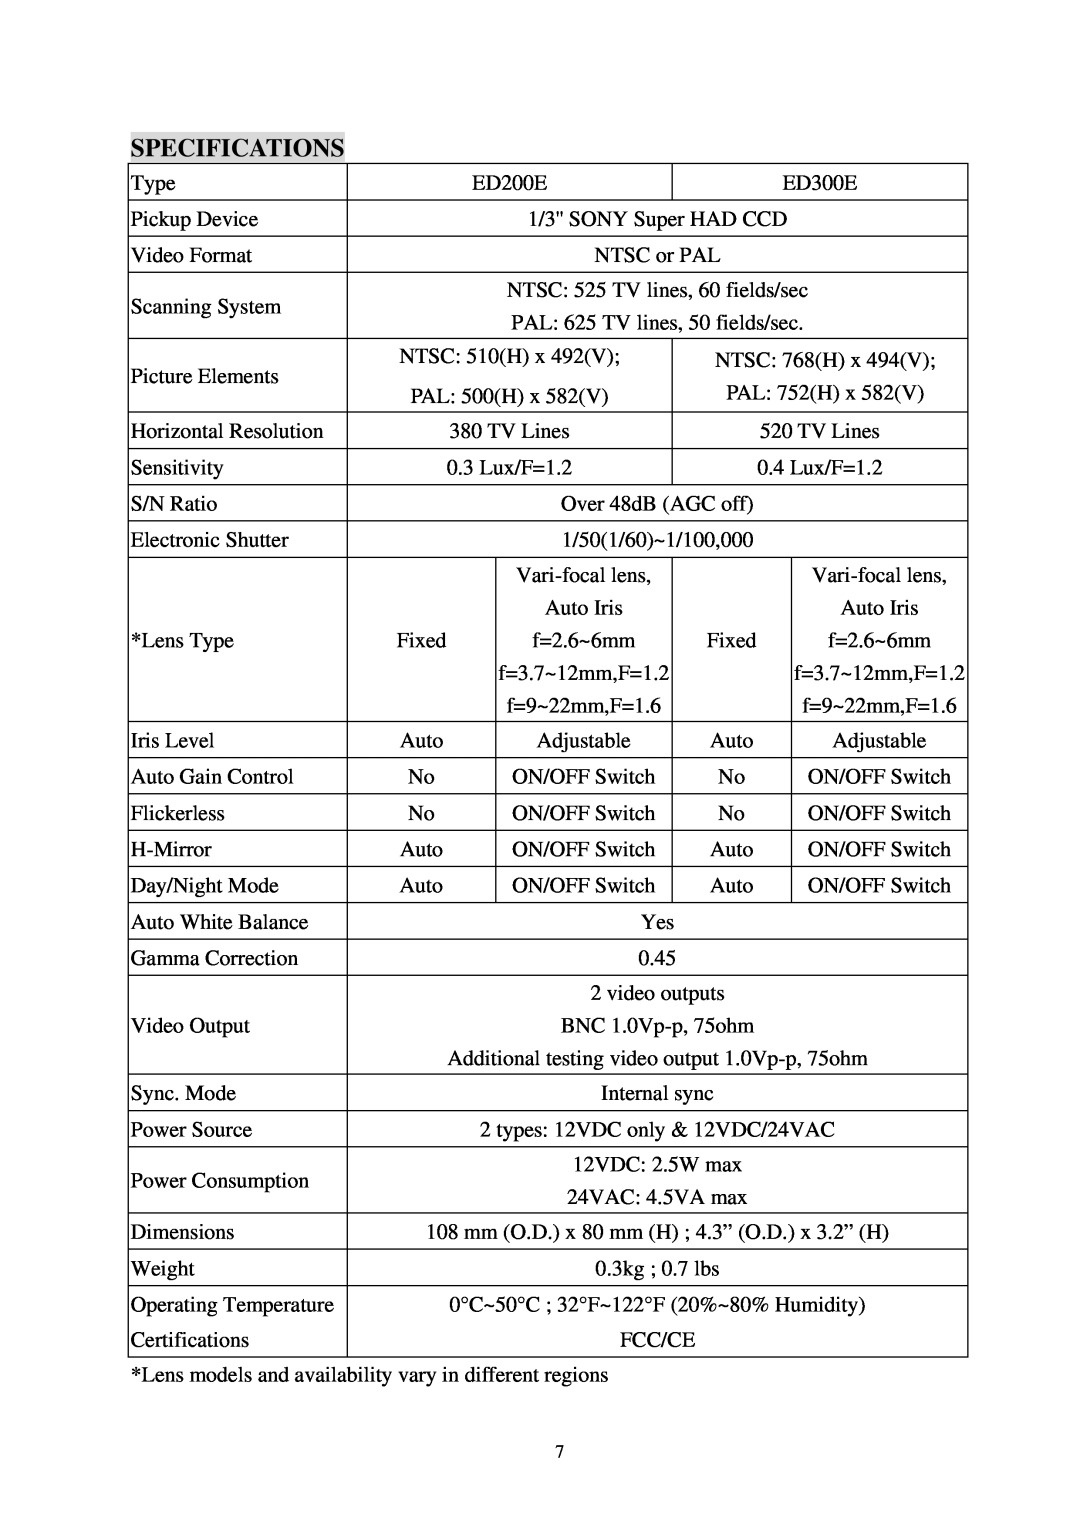 EverFocus ED300E, ED200E specifications Specifications 